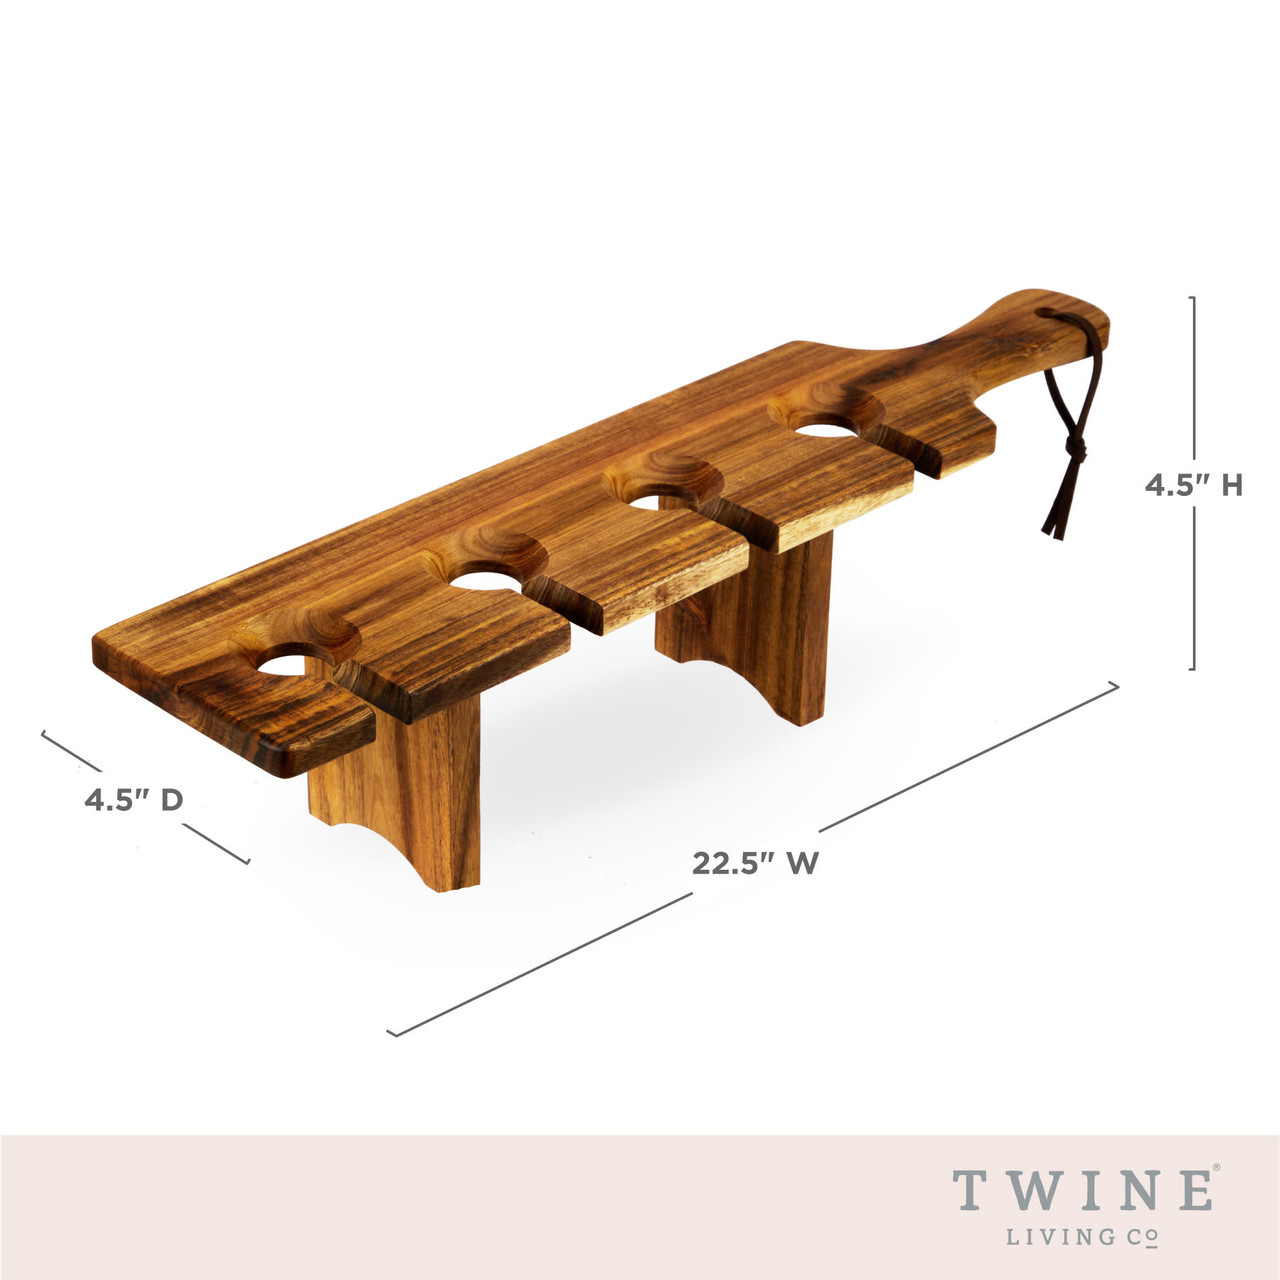 Easy Transport Flight Carrier by Twine Living